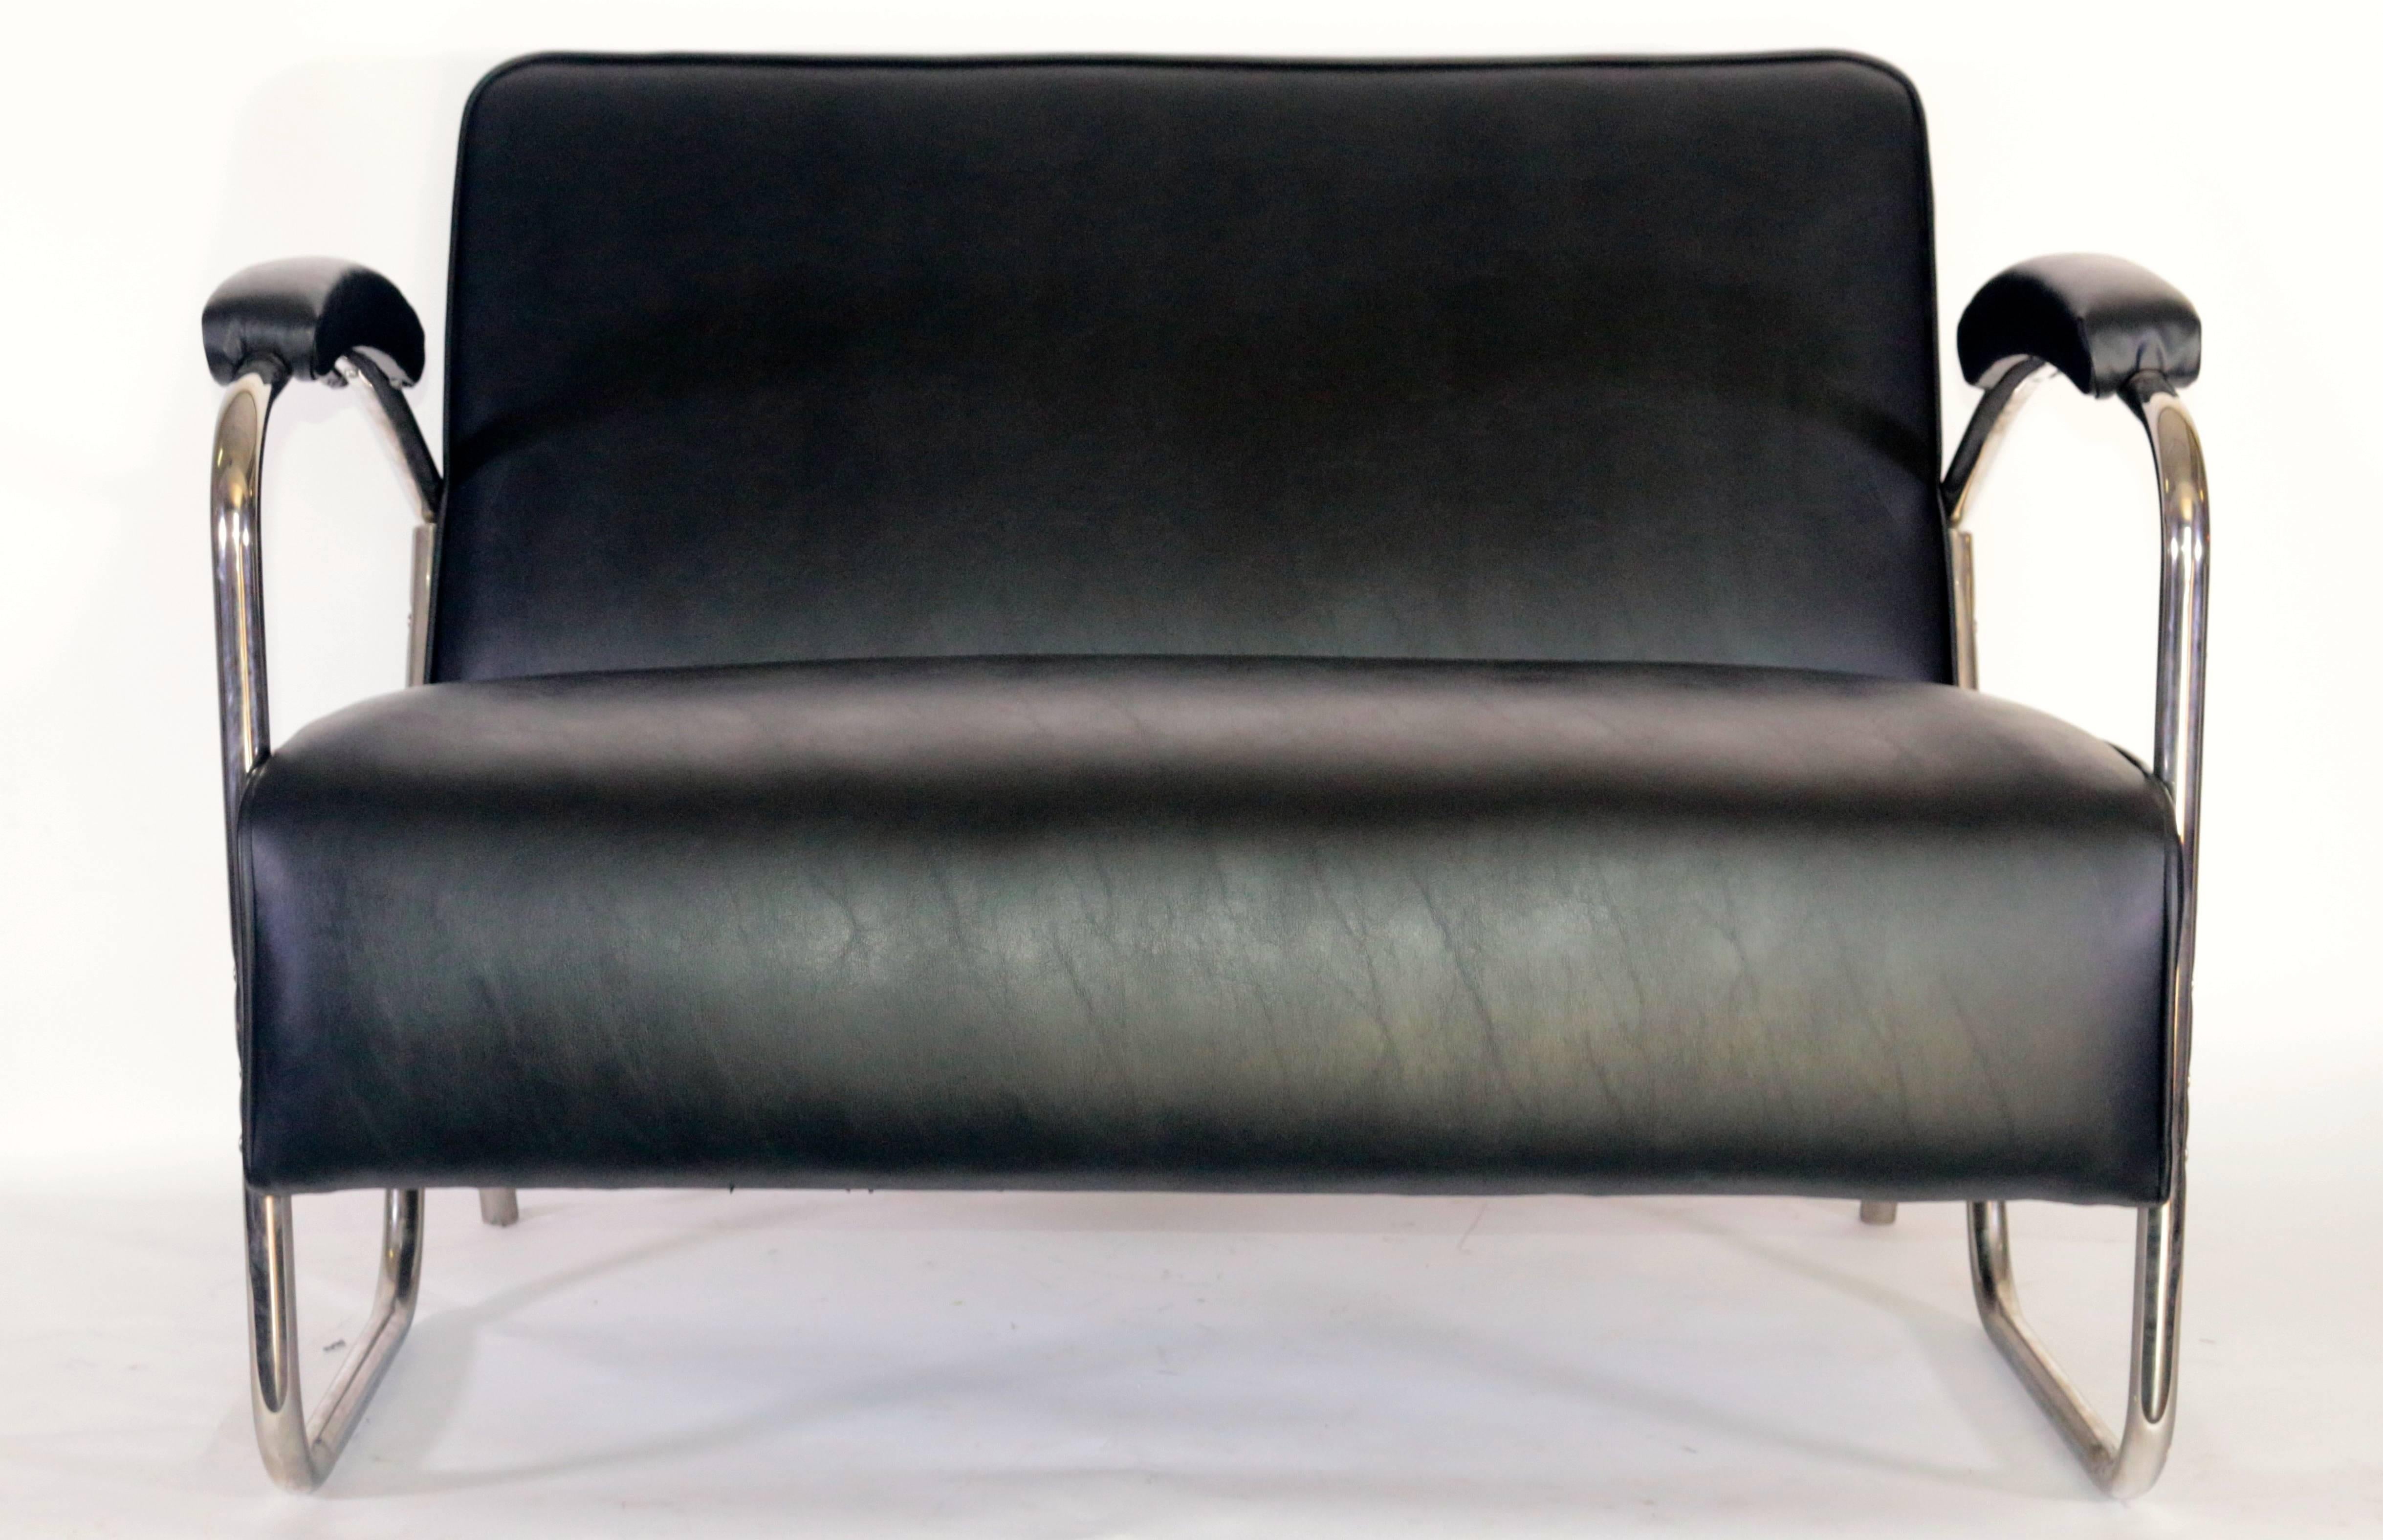 A pair of modern midcentury chrome leather sattees chairs in excellent used condition.